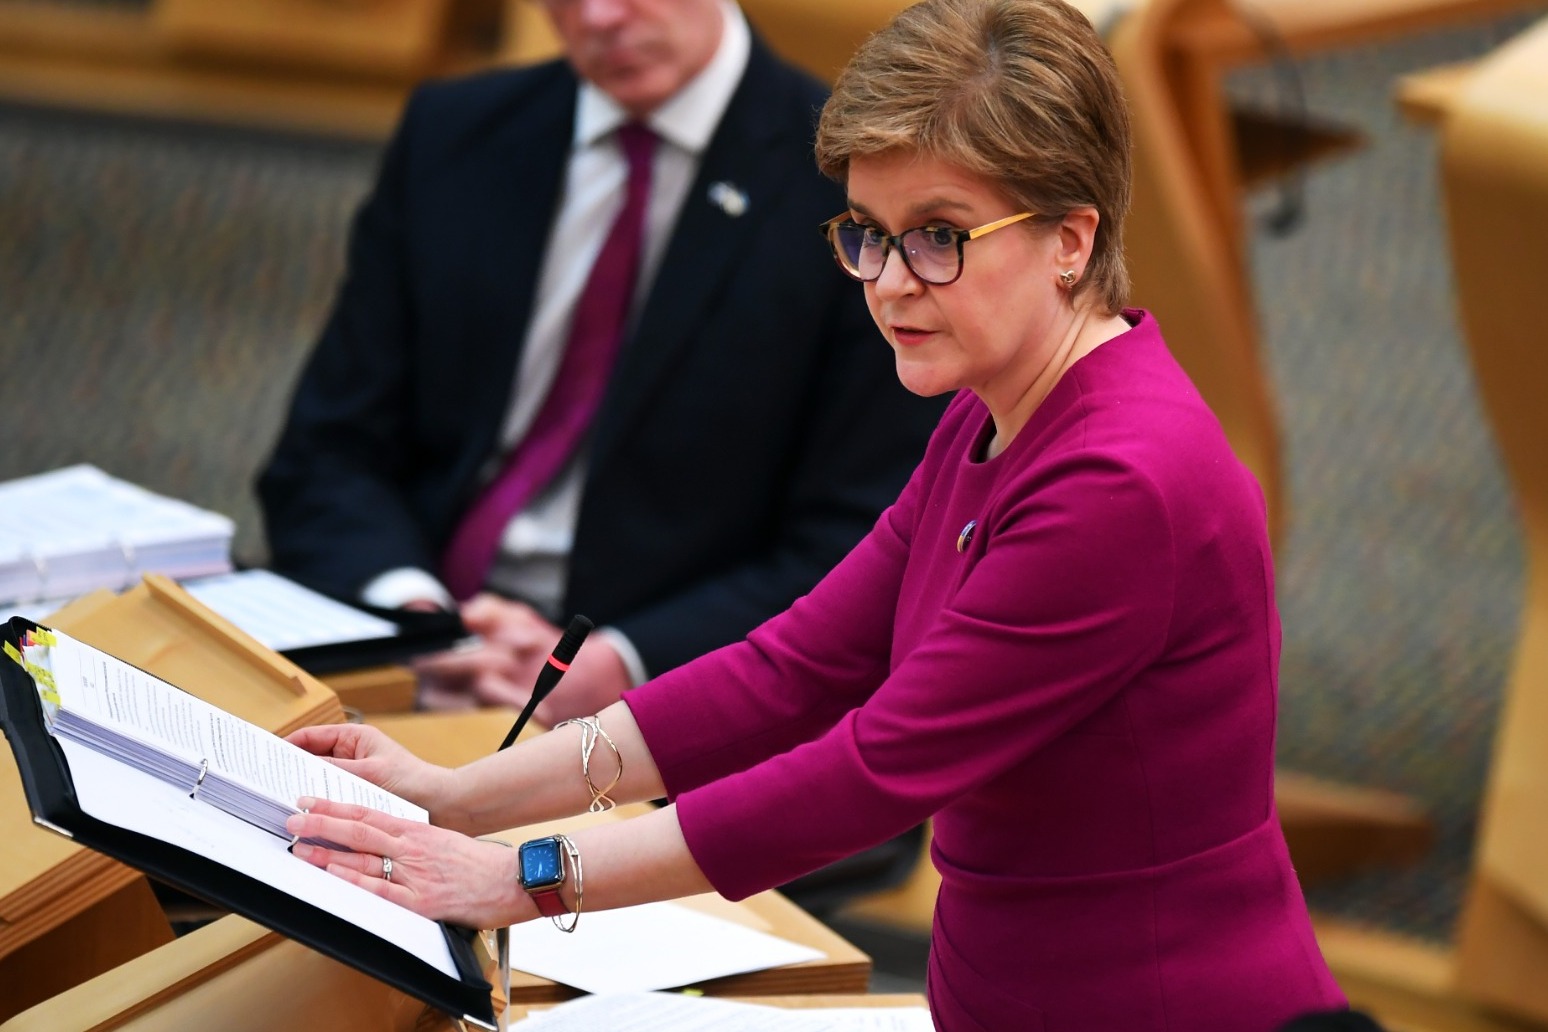 Nicola Sturgeon to announce if Covid restrictions to be eased further 